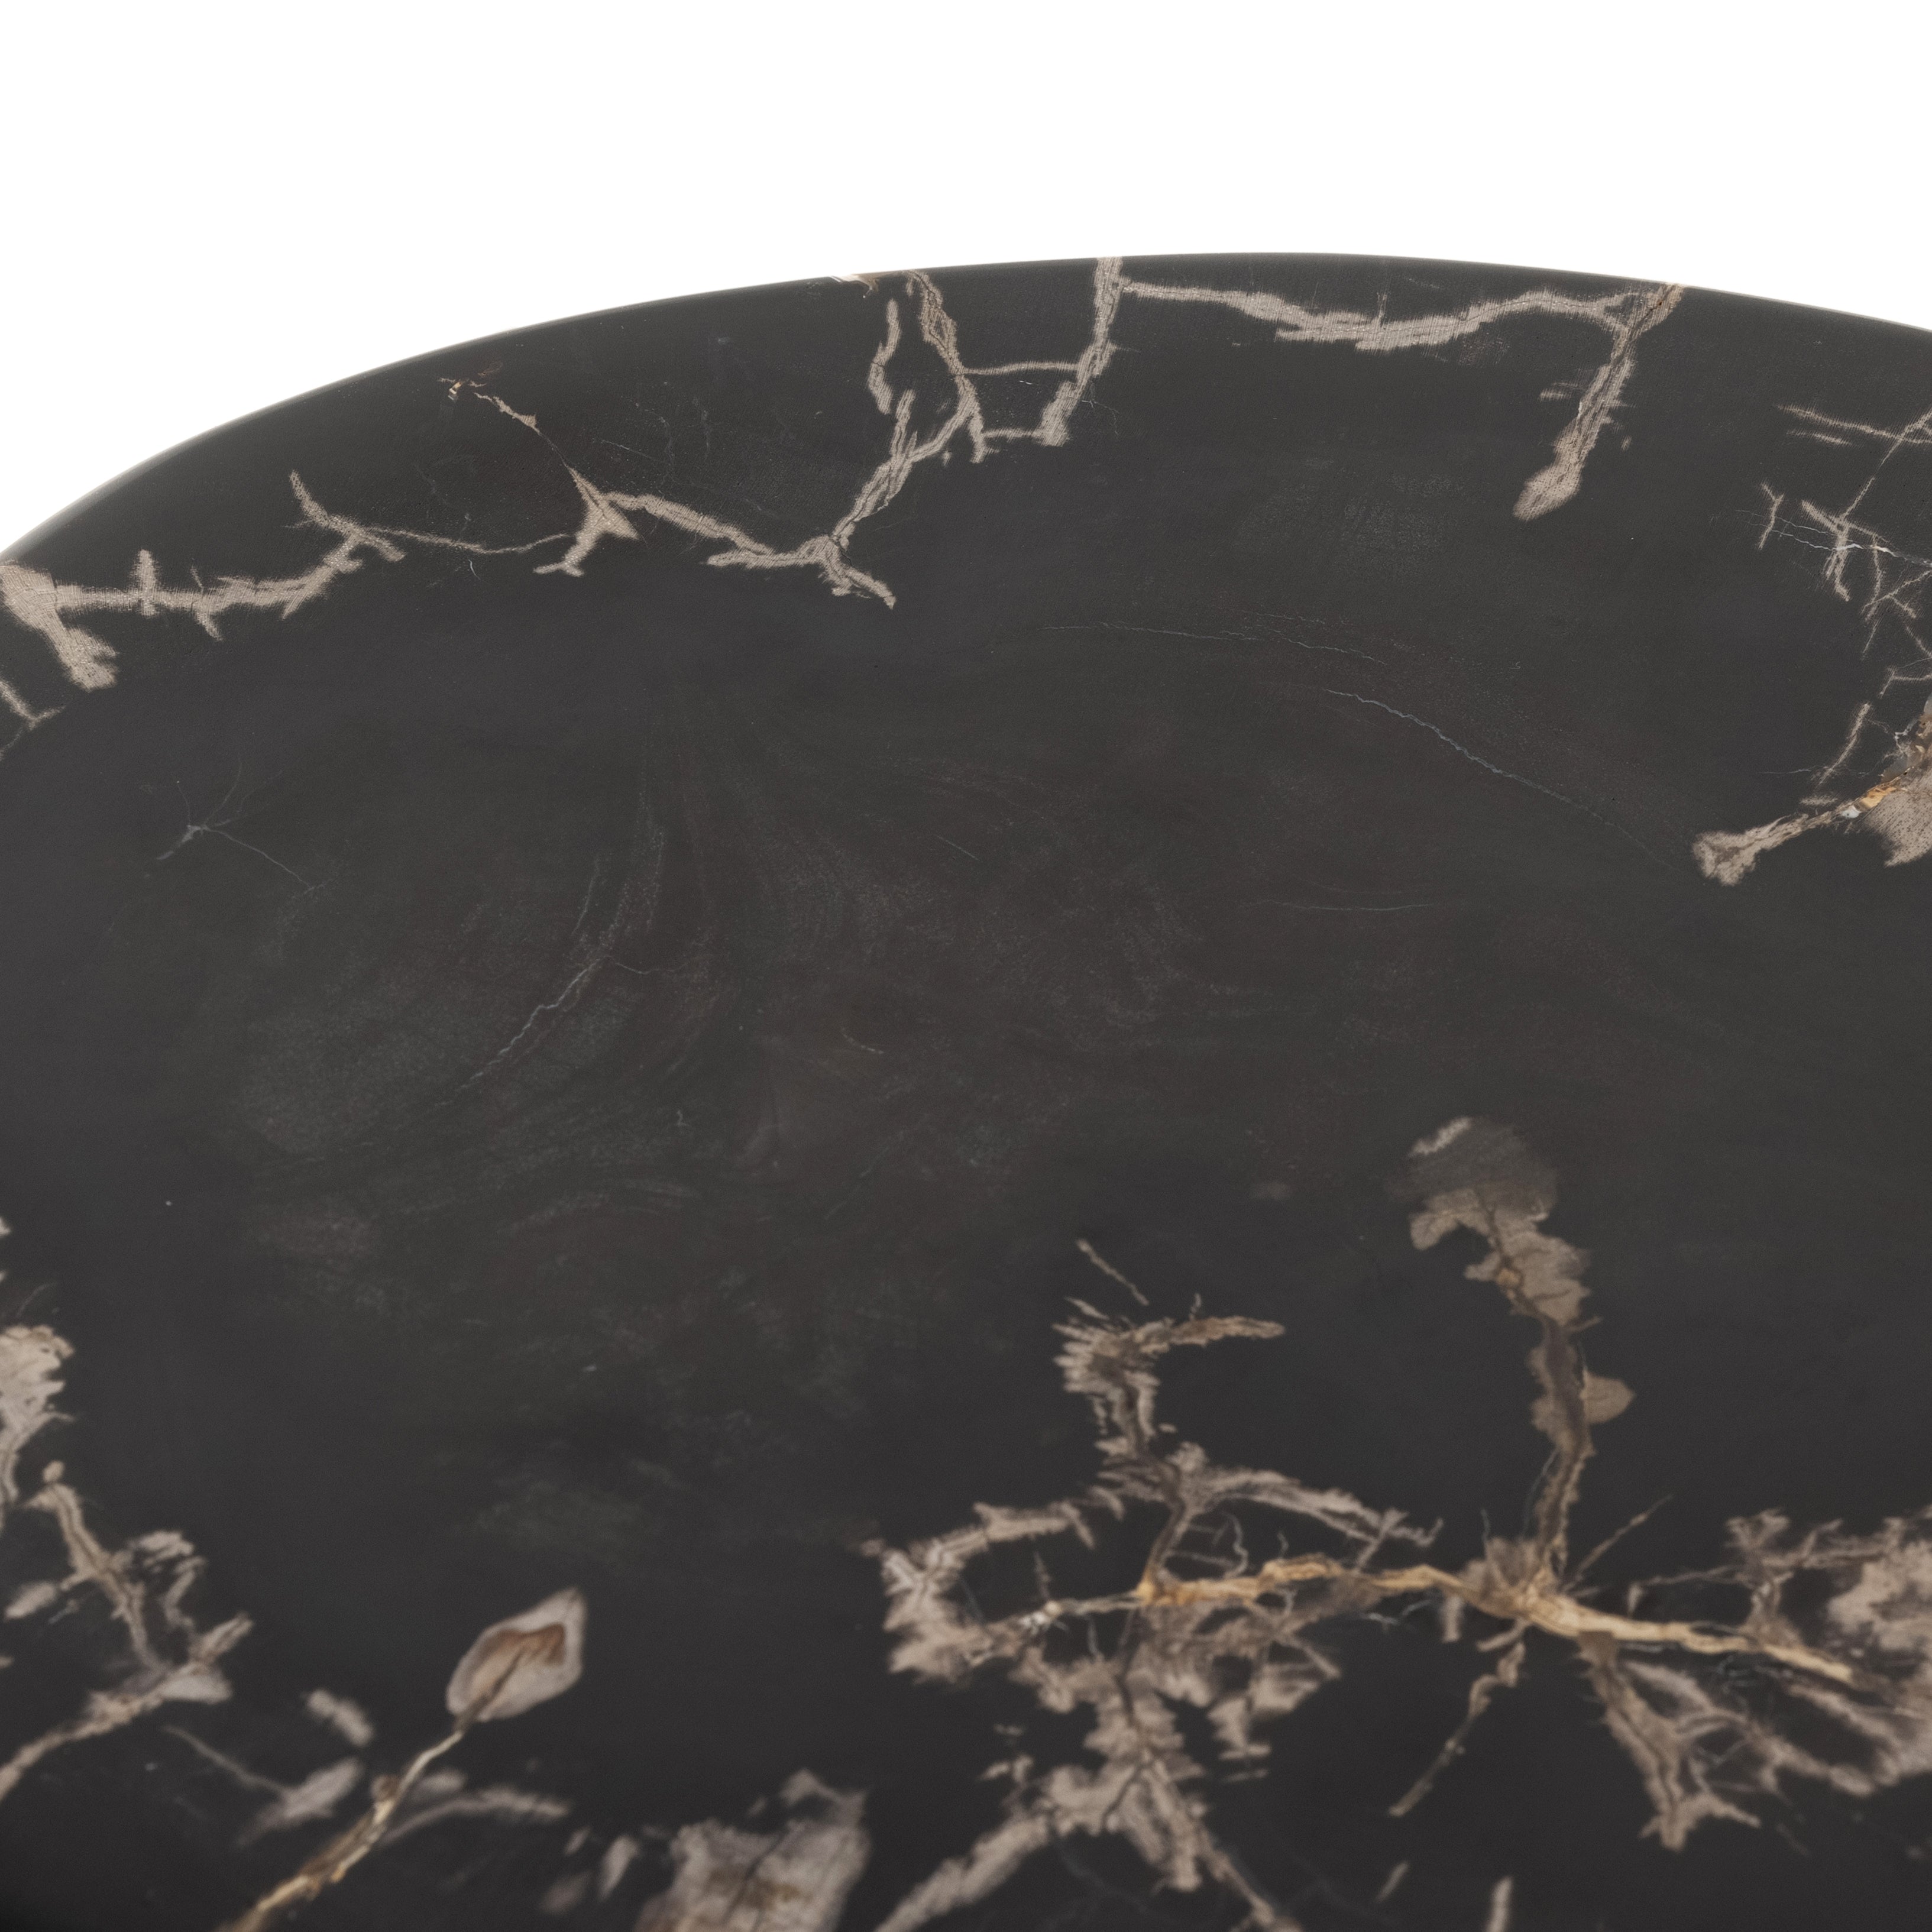 The Kos Dark Petrified Wood End Table is perfect to place in your living and make it come to life with it's design. Amethyst Home provides interior design services, furniture, rugs, and lighting in the Miami metro area. 